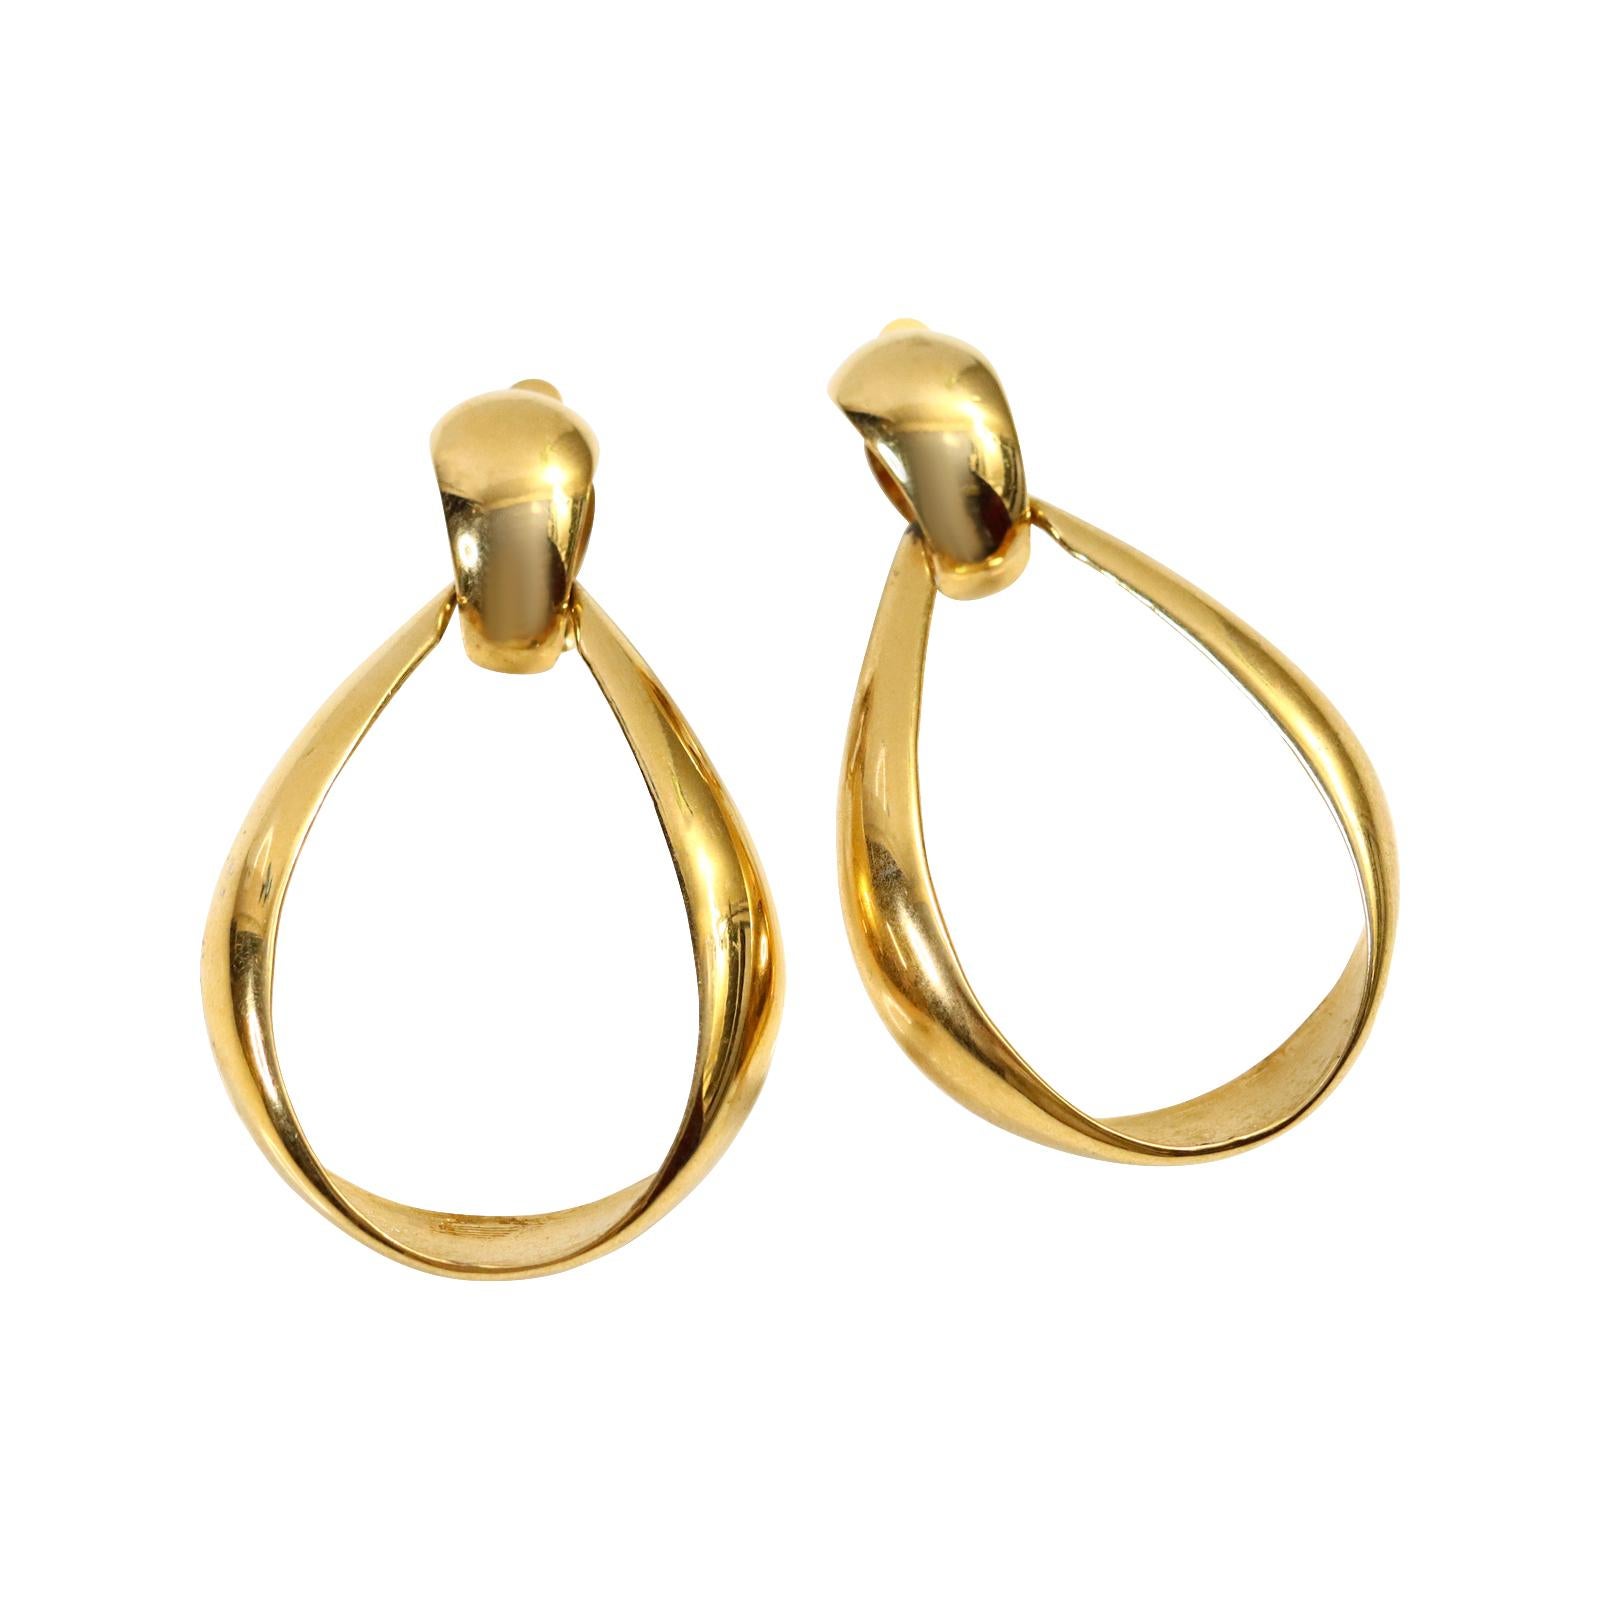 Vintage St John Gold Tone Hoop Earrings Circa 1990s. These are the forever type of earrings that never go out of style. St John made some great jewelry in the 1980s/1990s.  These front facing gold hoops look so chic and stunning with everything. No